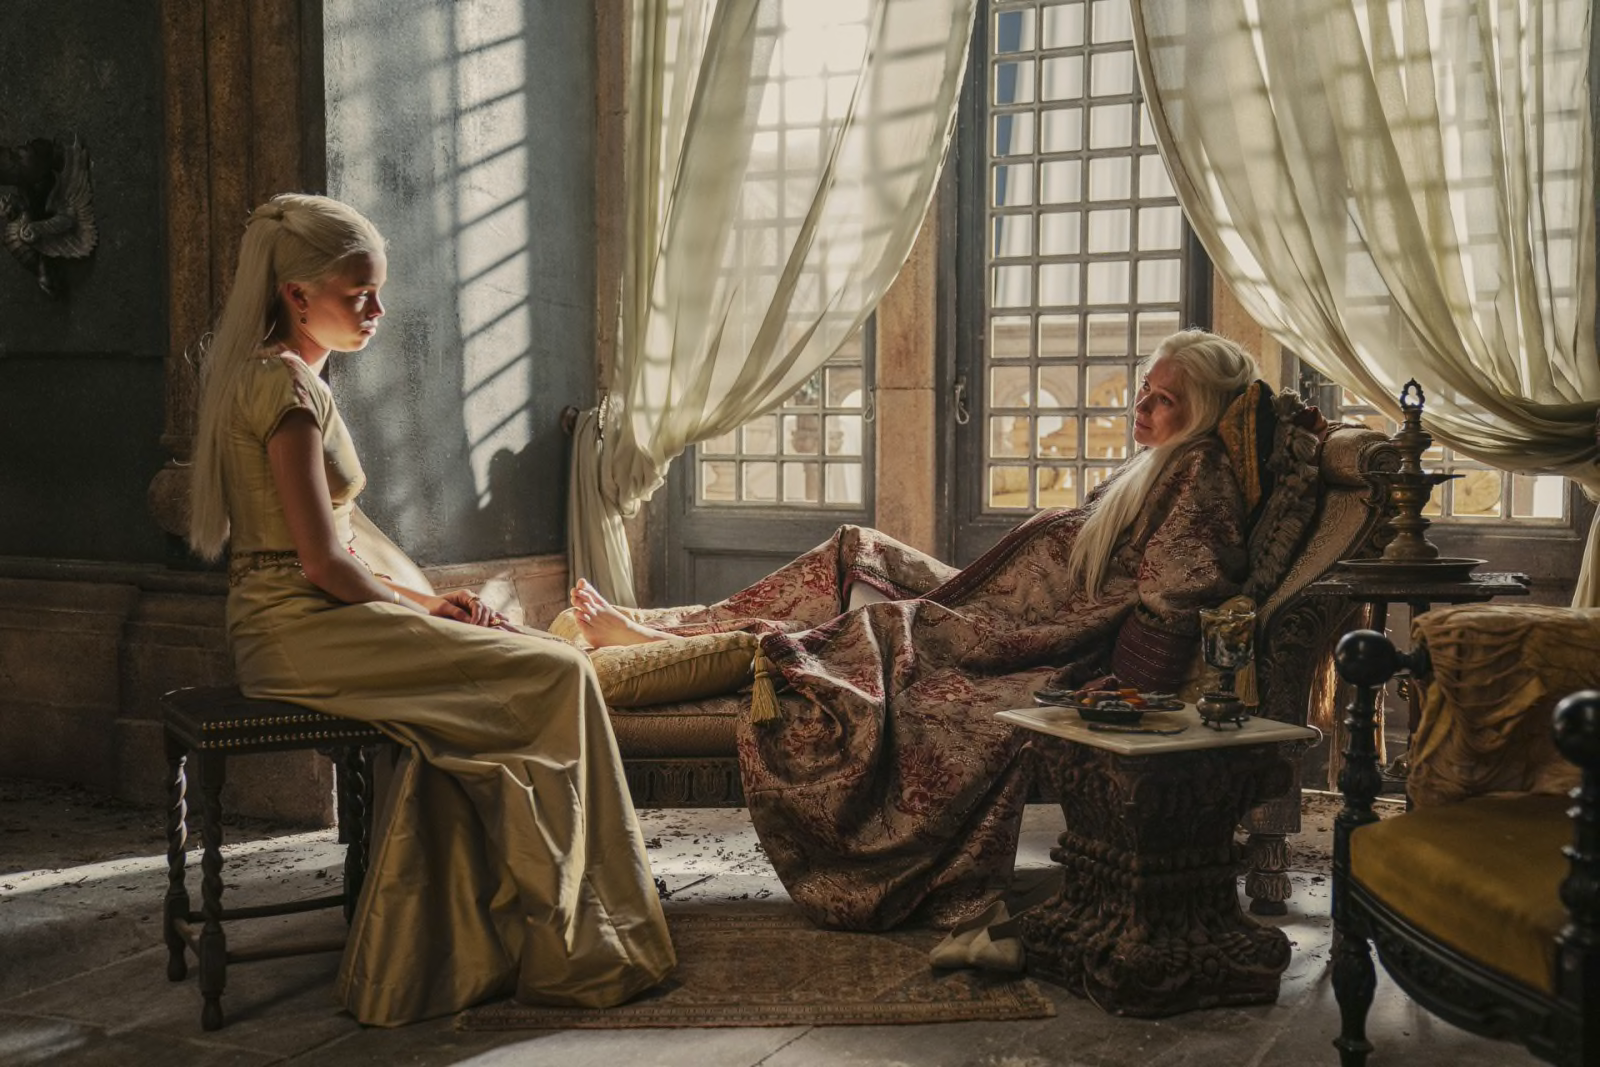 House of the Dragon episode 1 recap: Let a different game of thrones begin